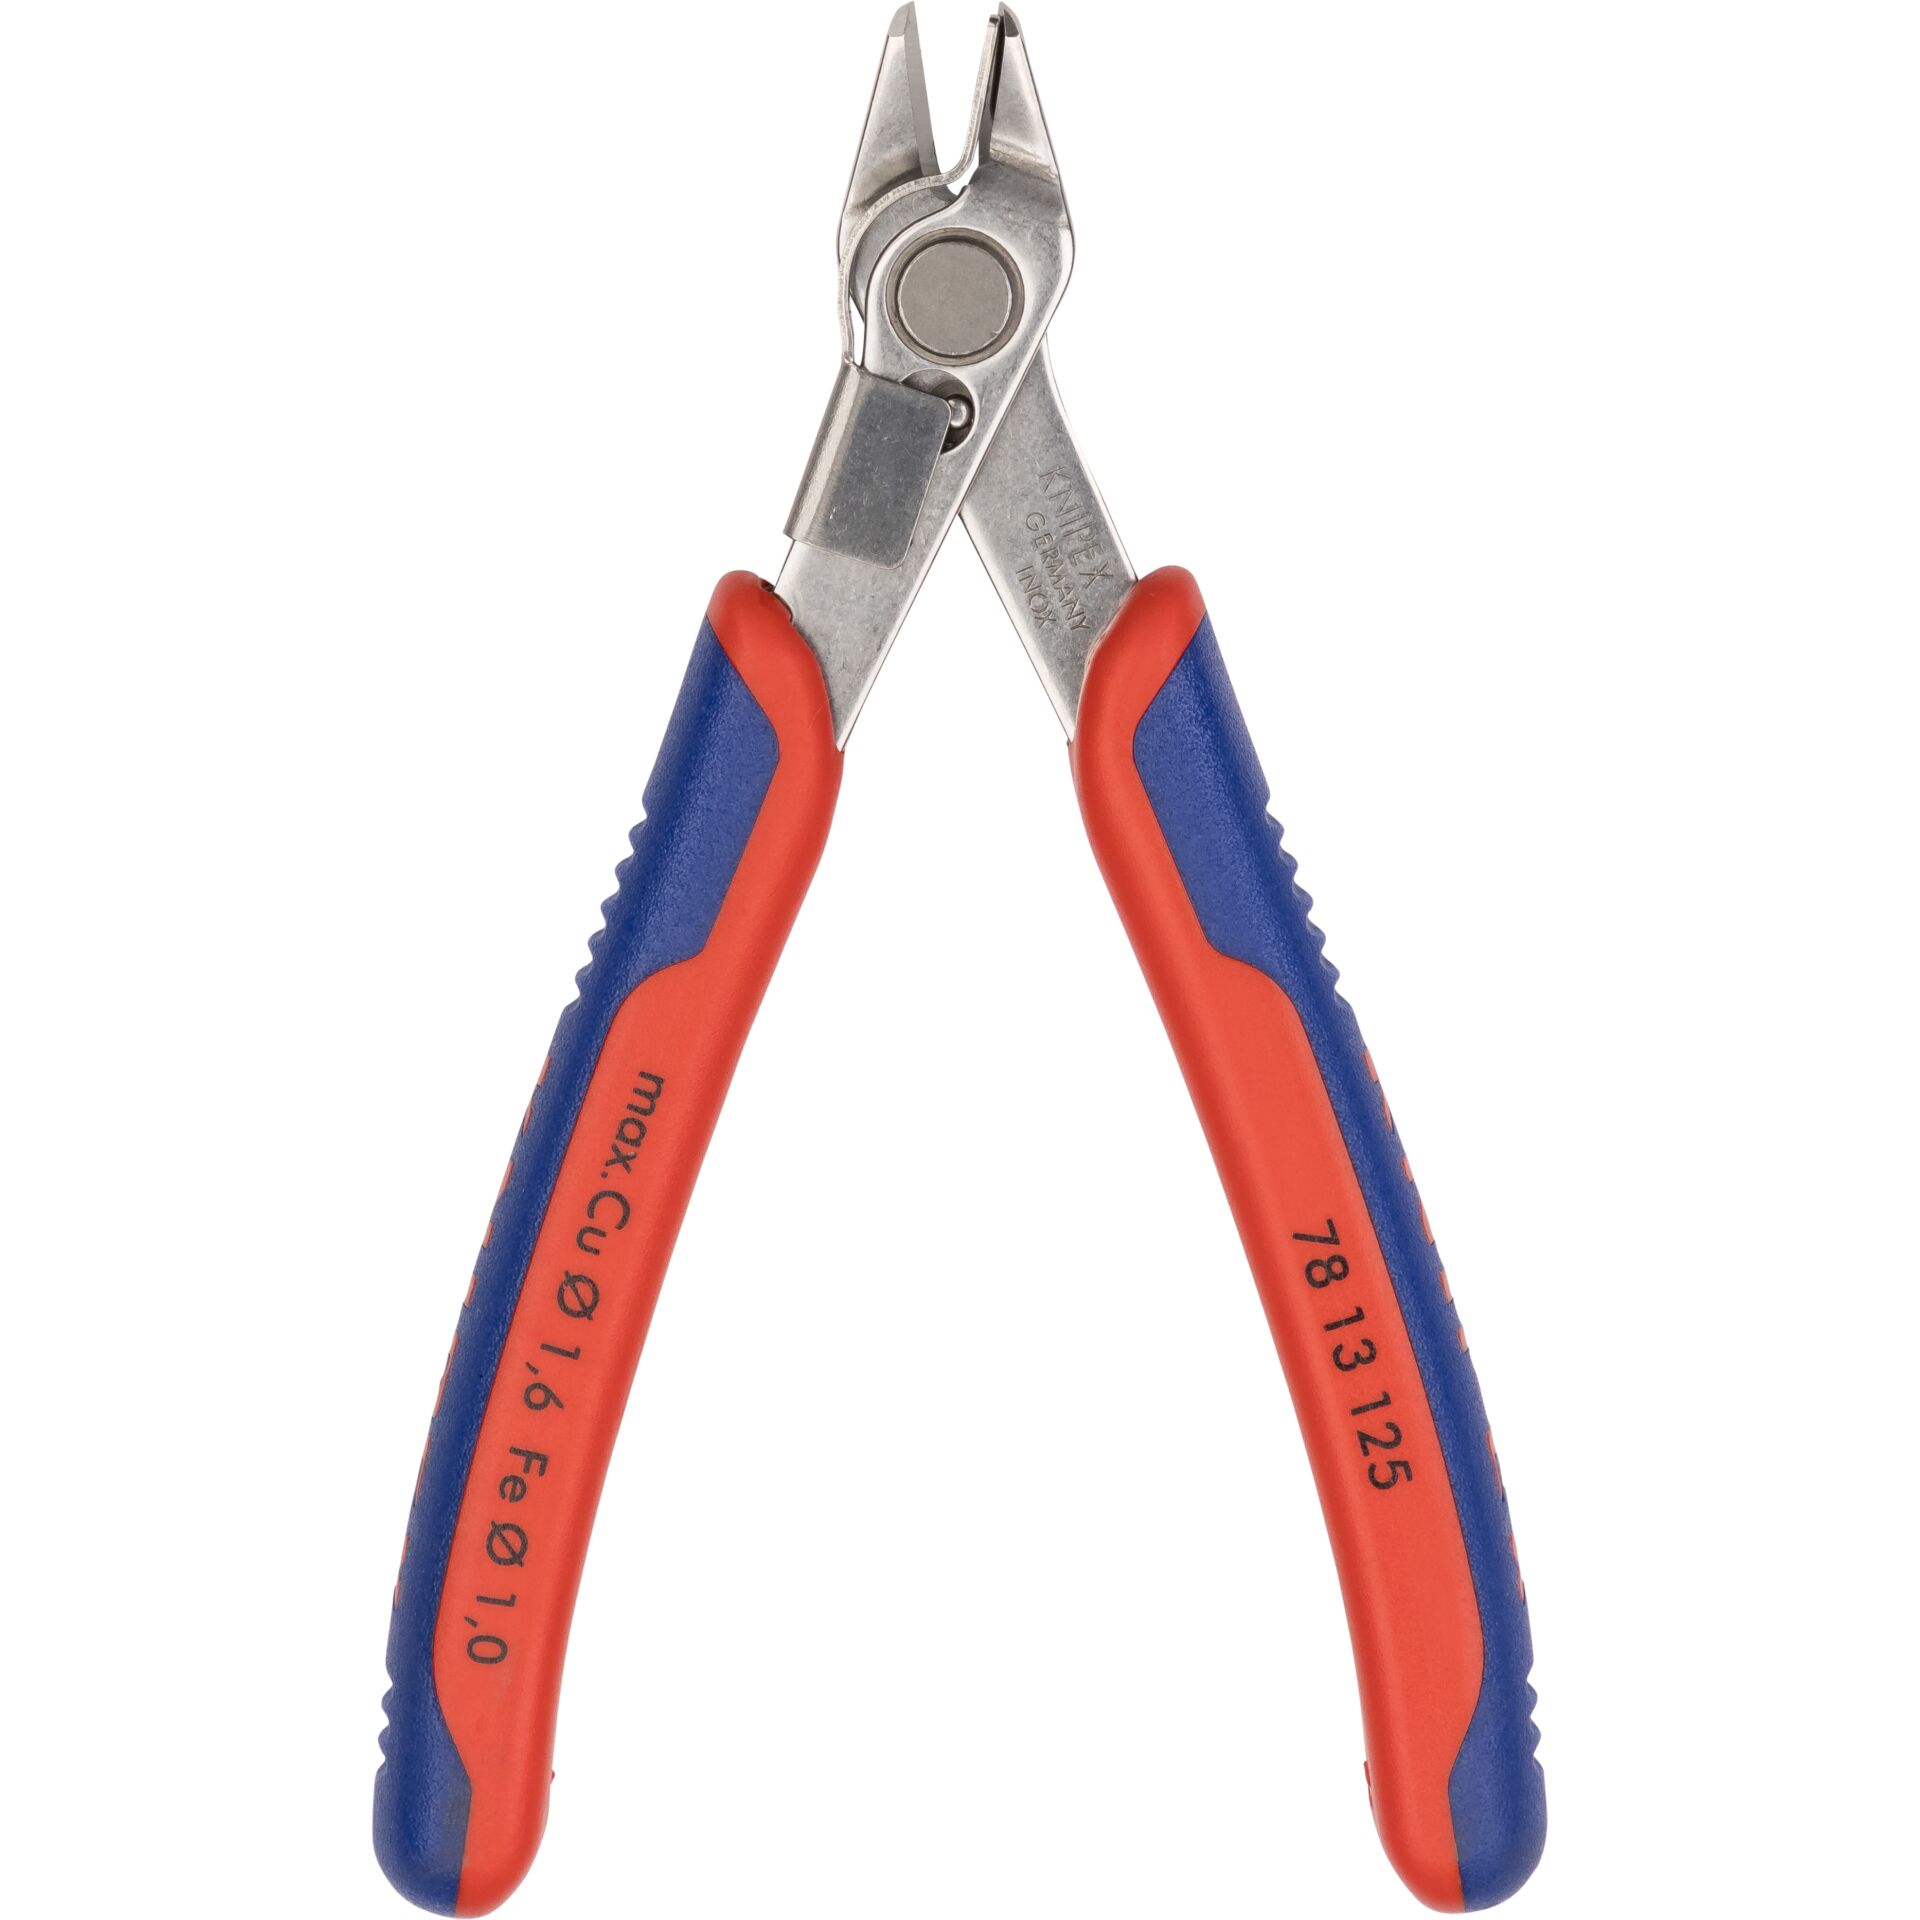 Knipex Electronic Super Knips tronchese